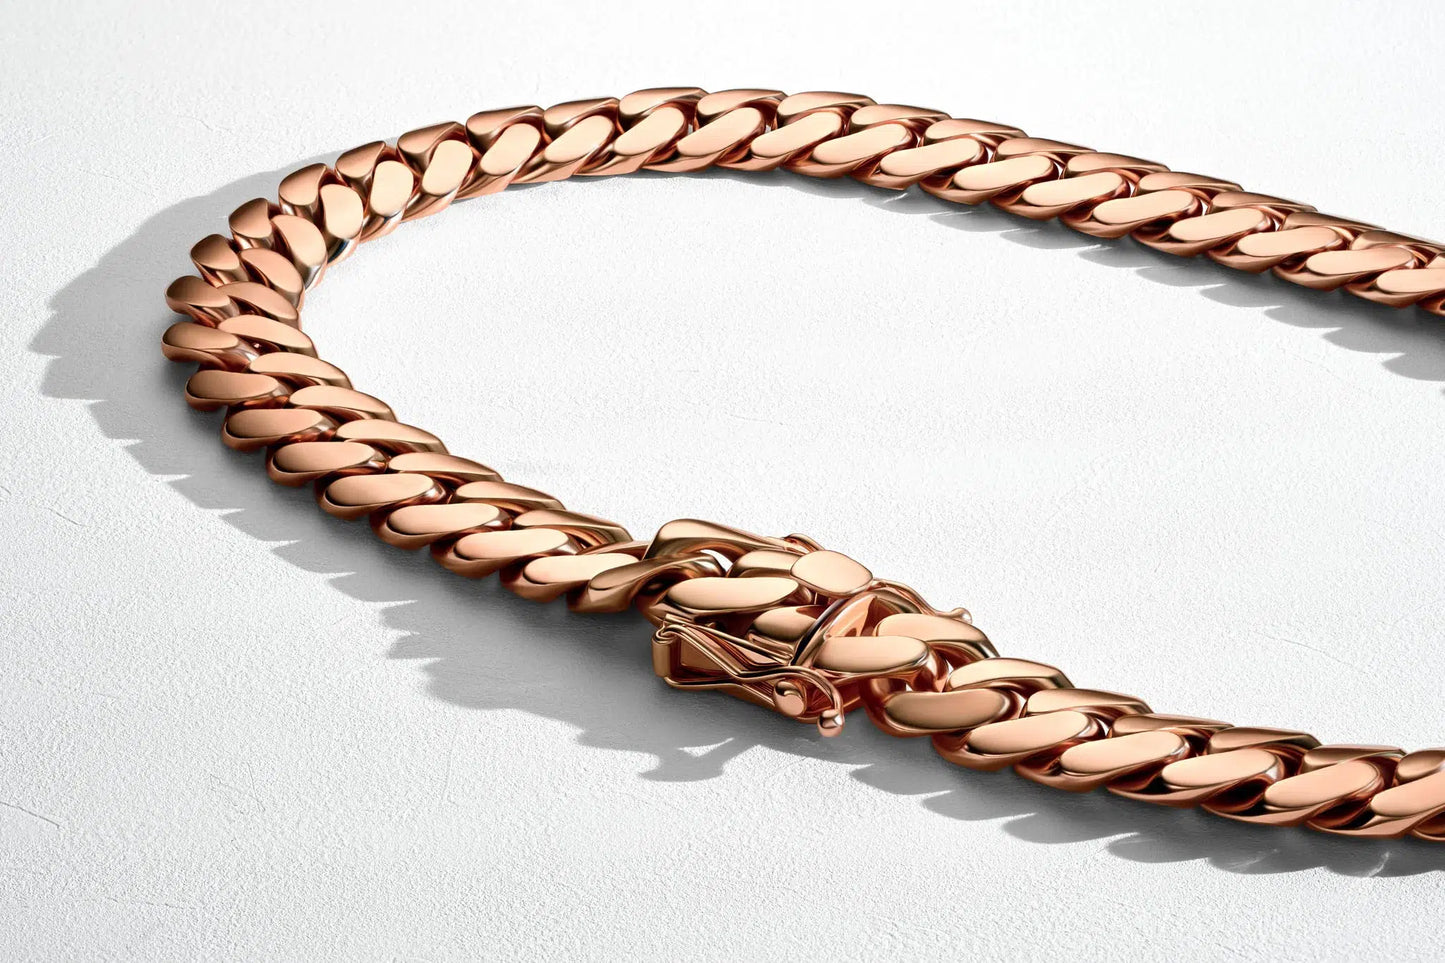 Rose Gold Handmade Tight Link Miami Cuban Chains In 999 Silver - MADE TO ORDER In 1-2 Weeks